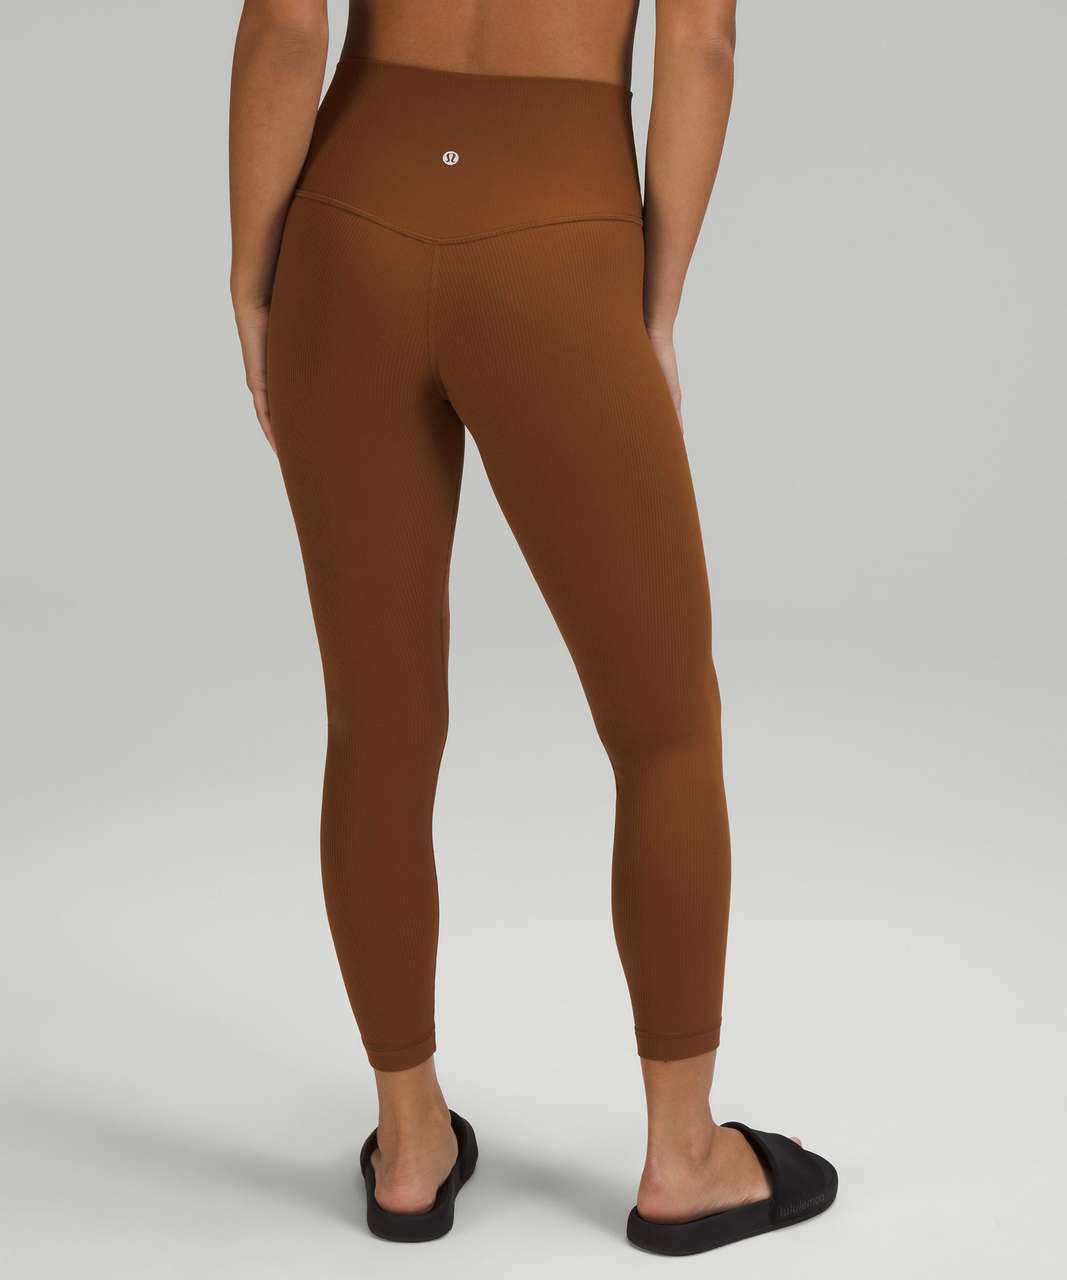 Lululemon Align Ribbed High-Rise Pant 25" - Roasted Brown